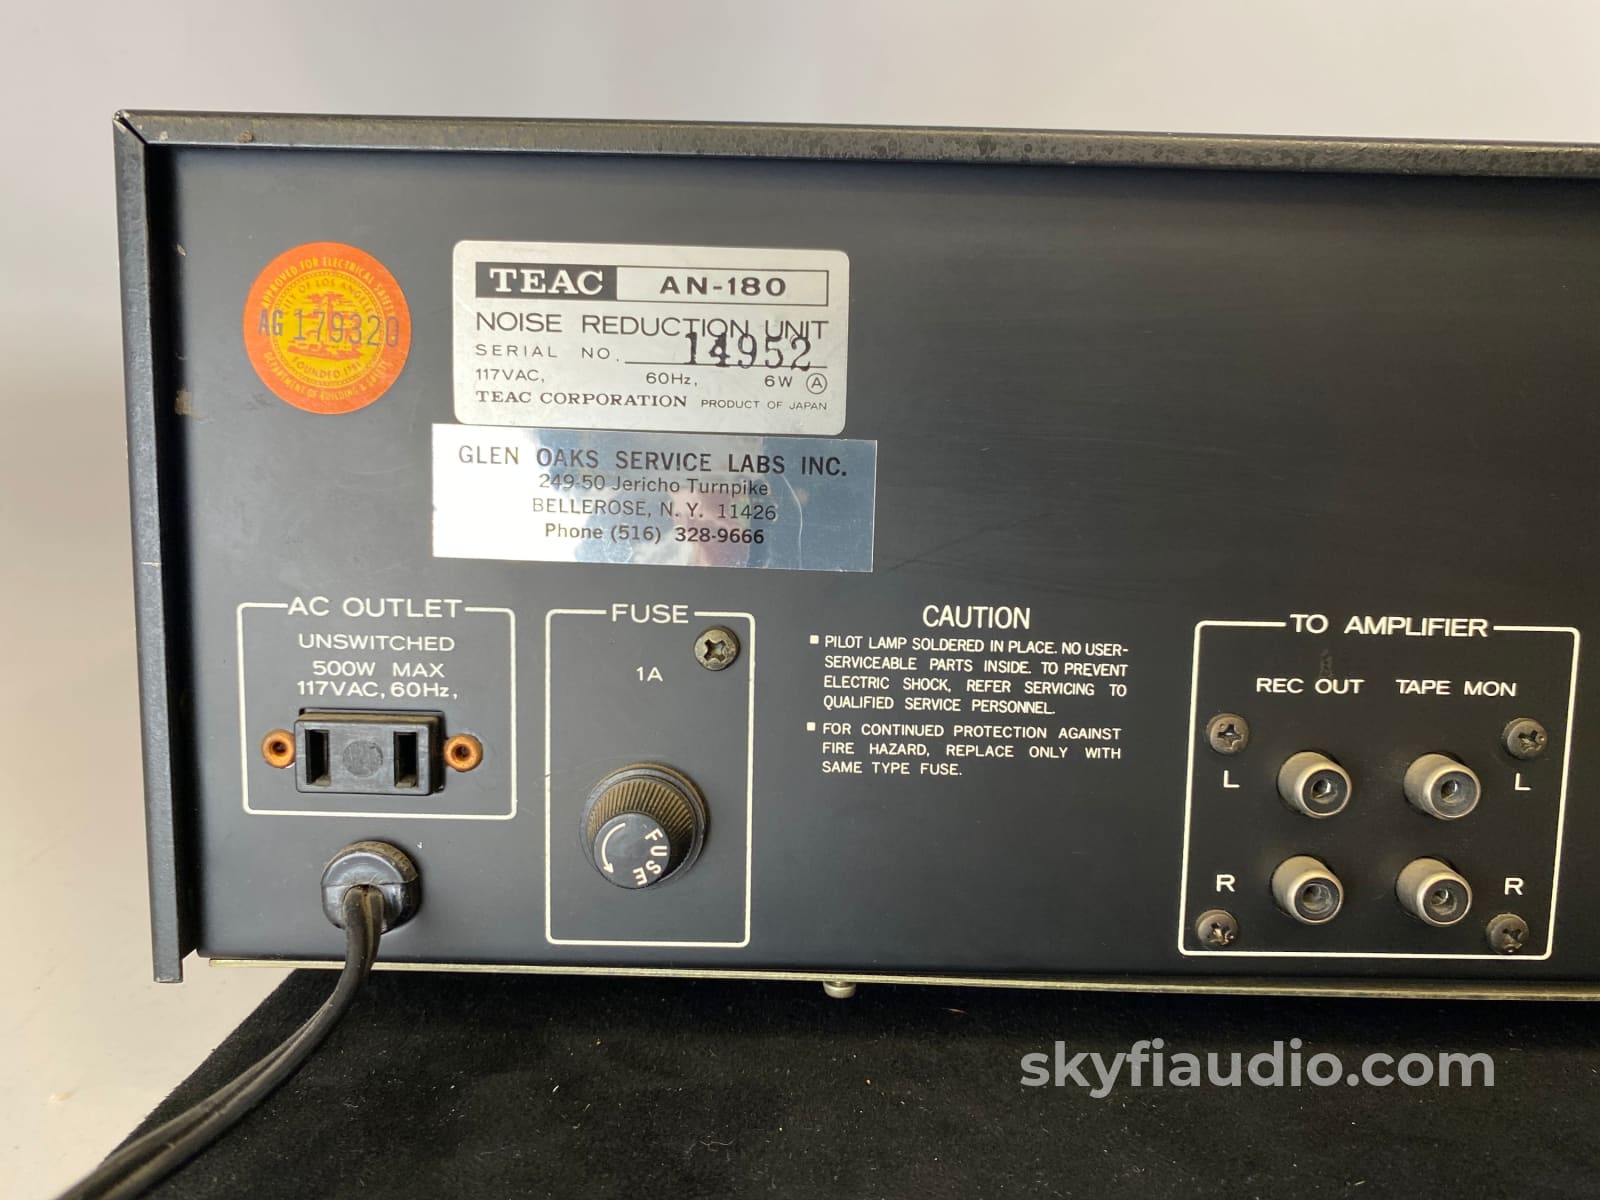 Teac An-180 Dolby Noise Reduction Unit - Tested And Working Accessory